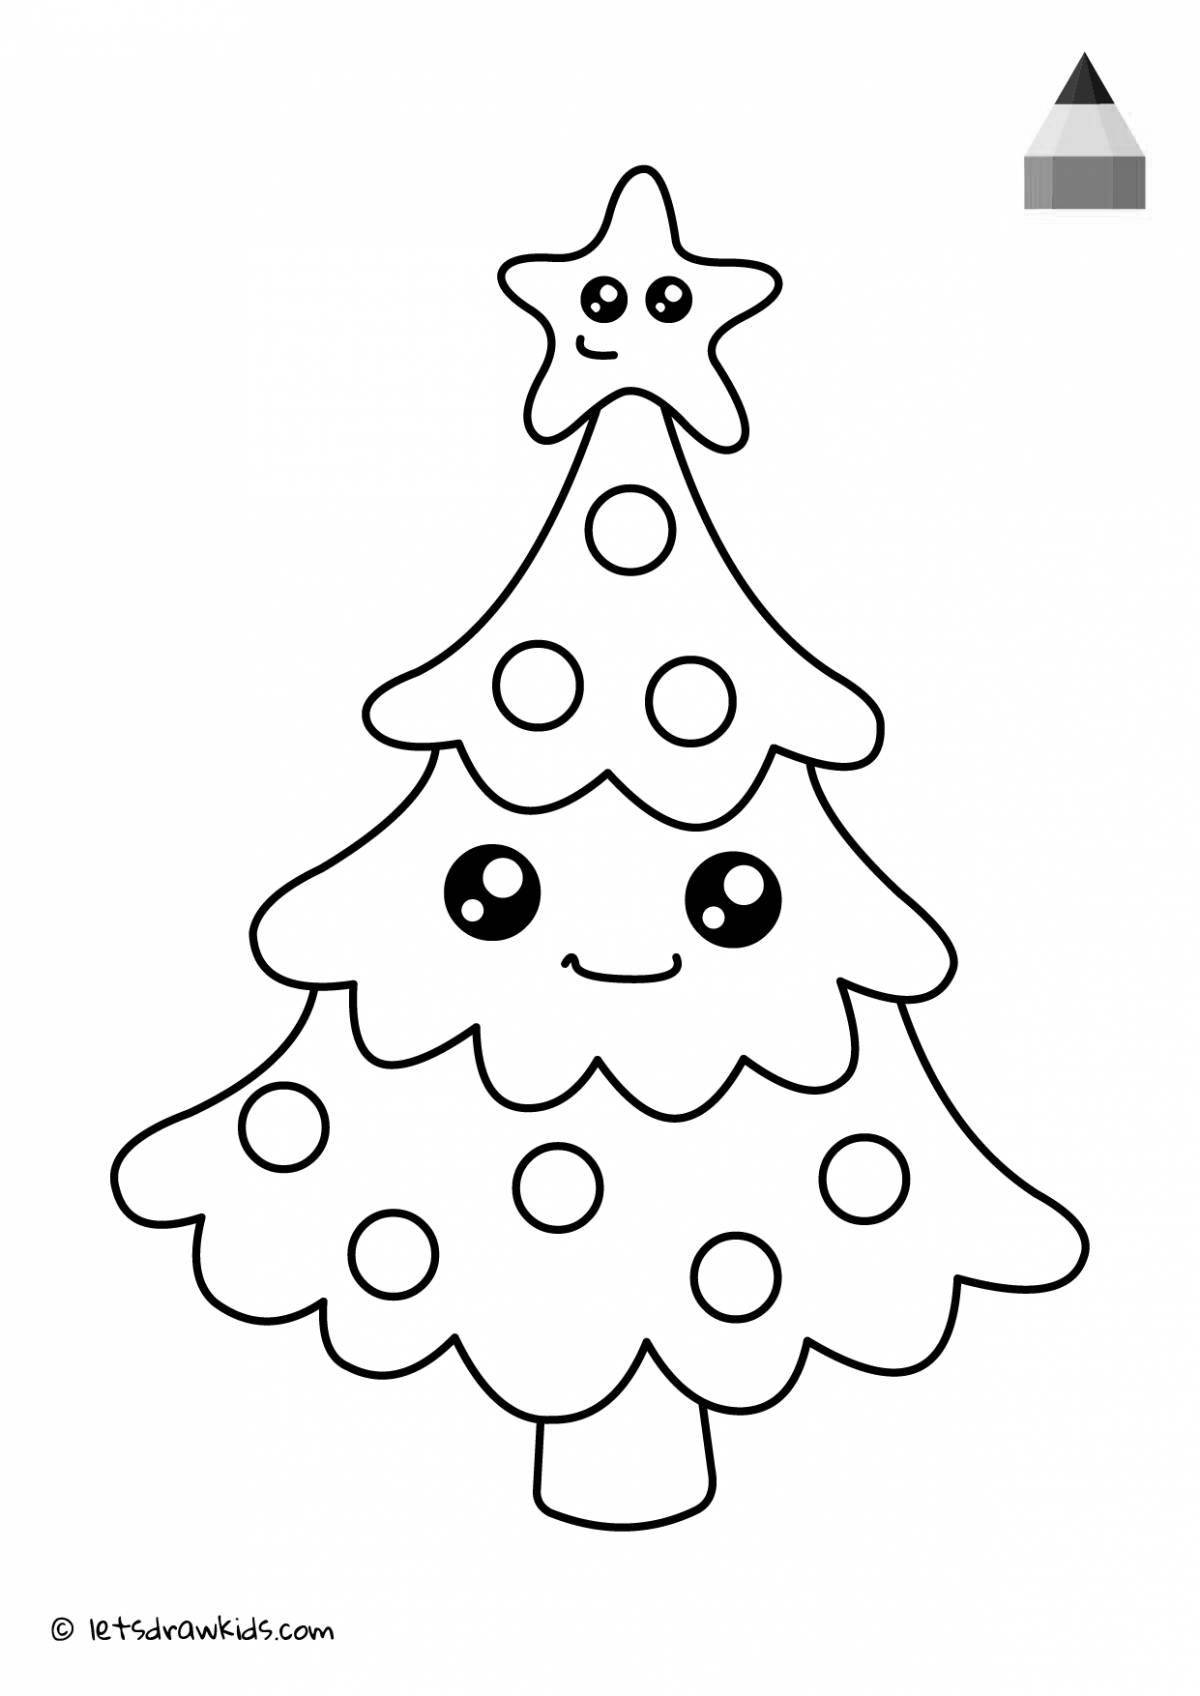 Fun Christmas tree picture for kids